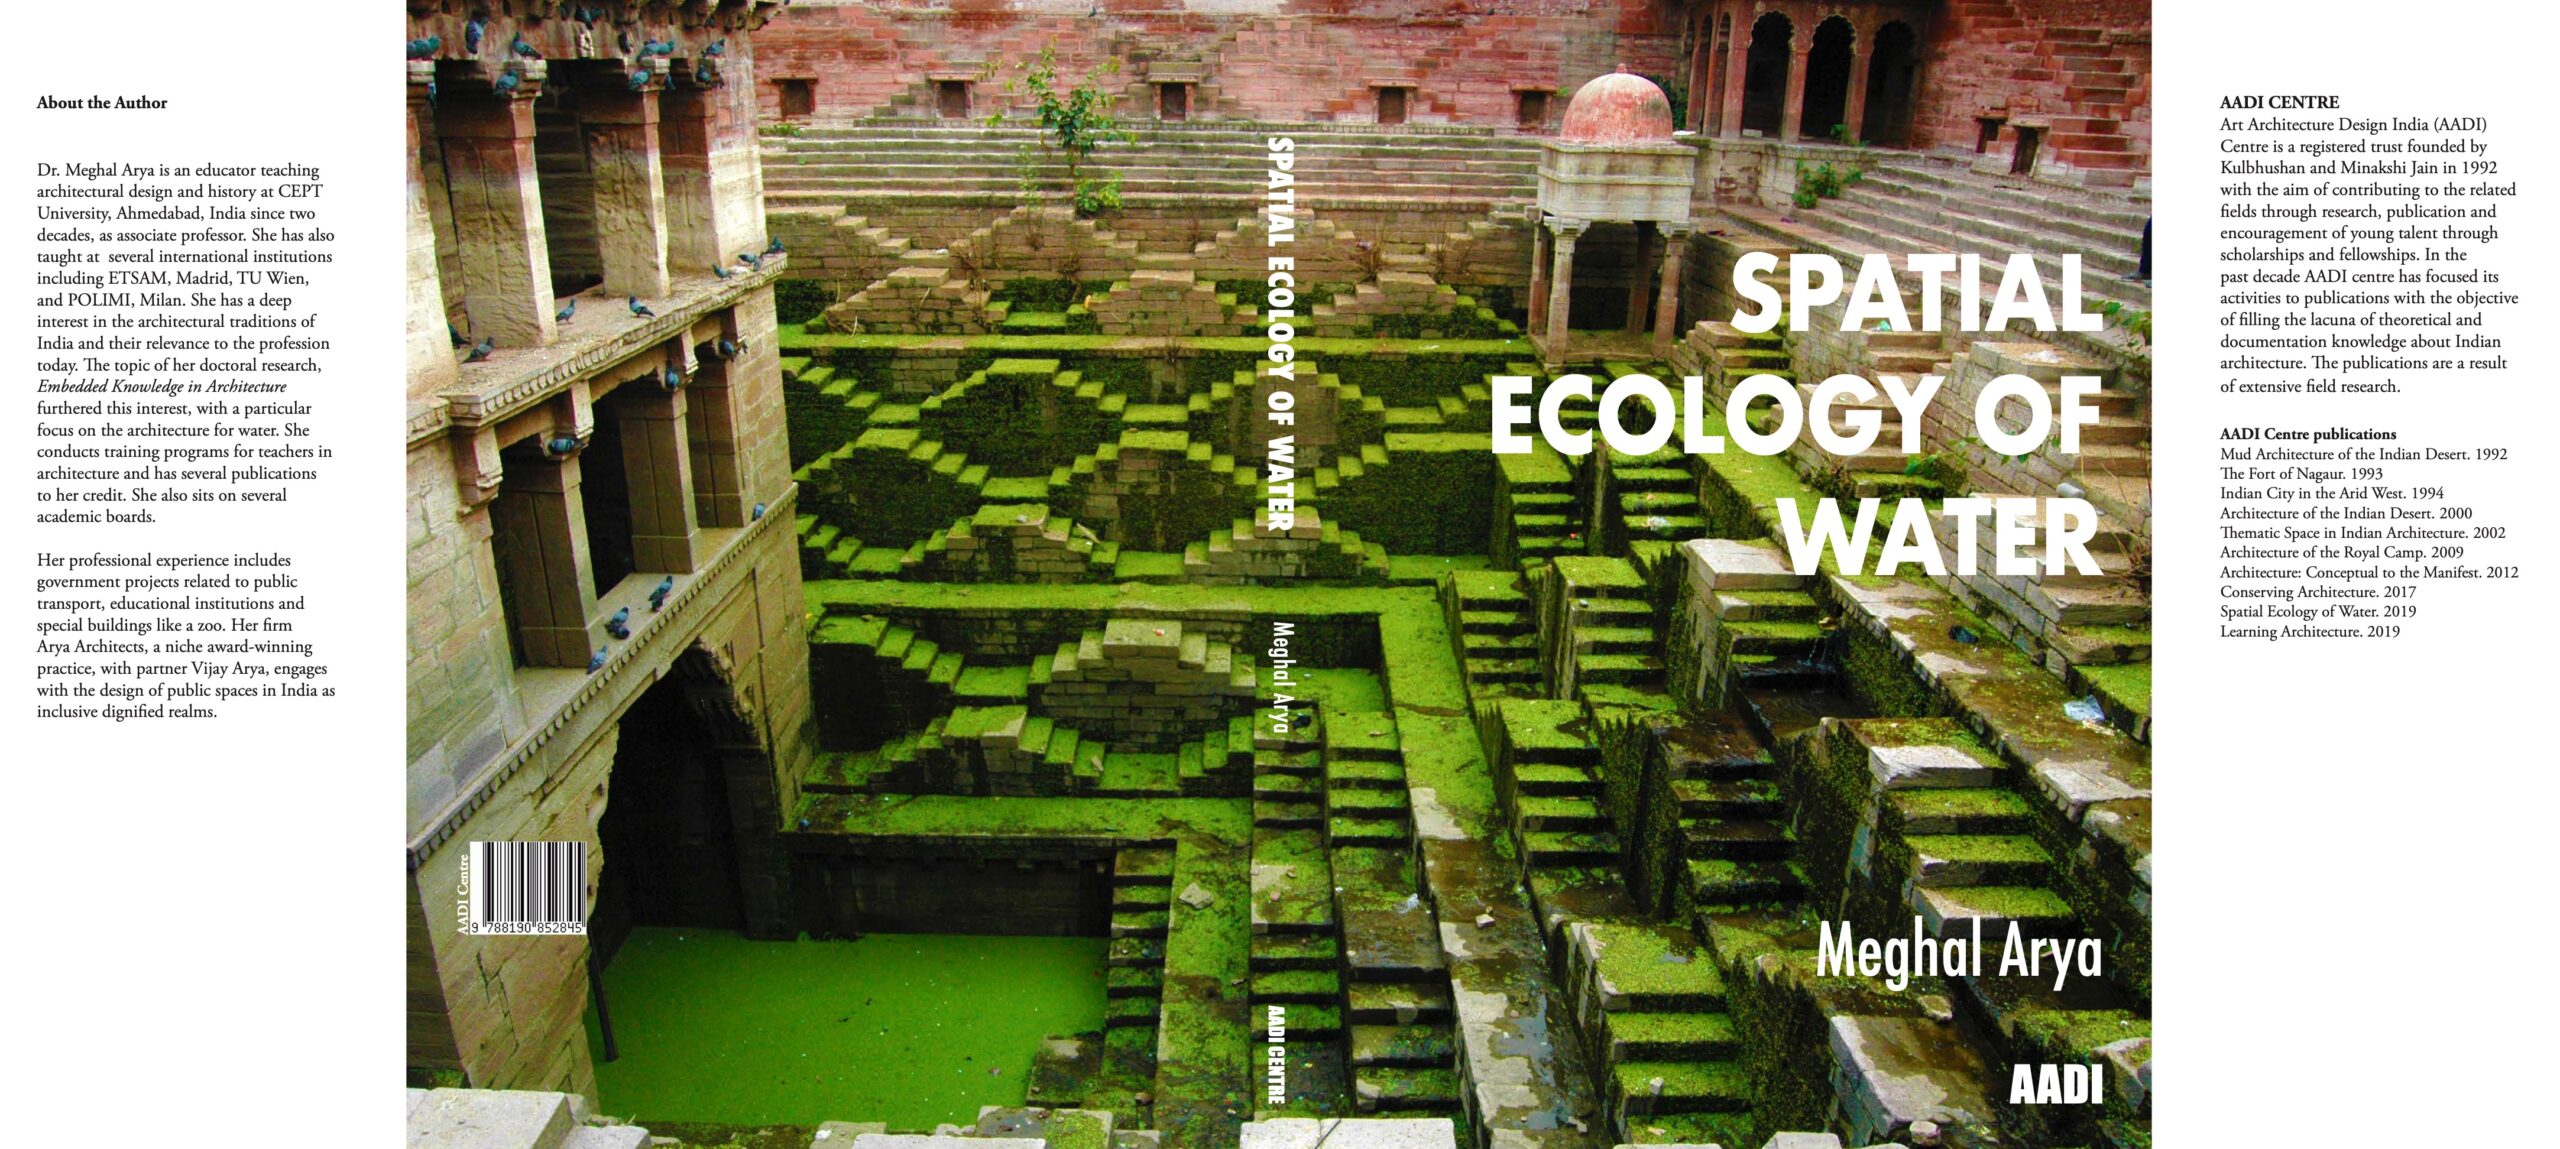 Spatial Ecology of Water: Dr. Meghal Arya